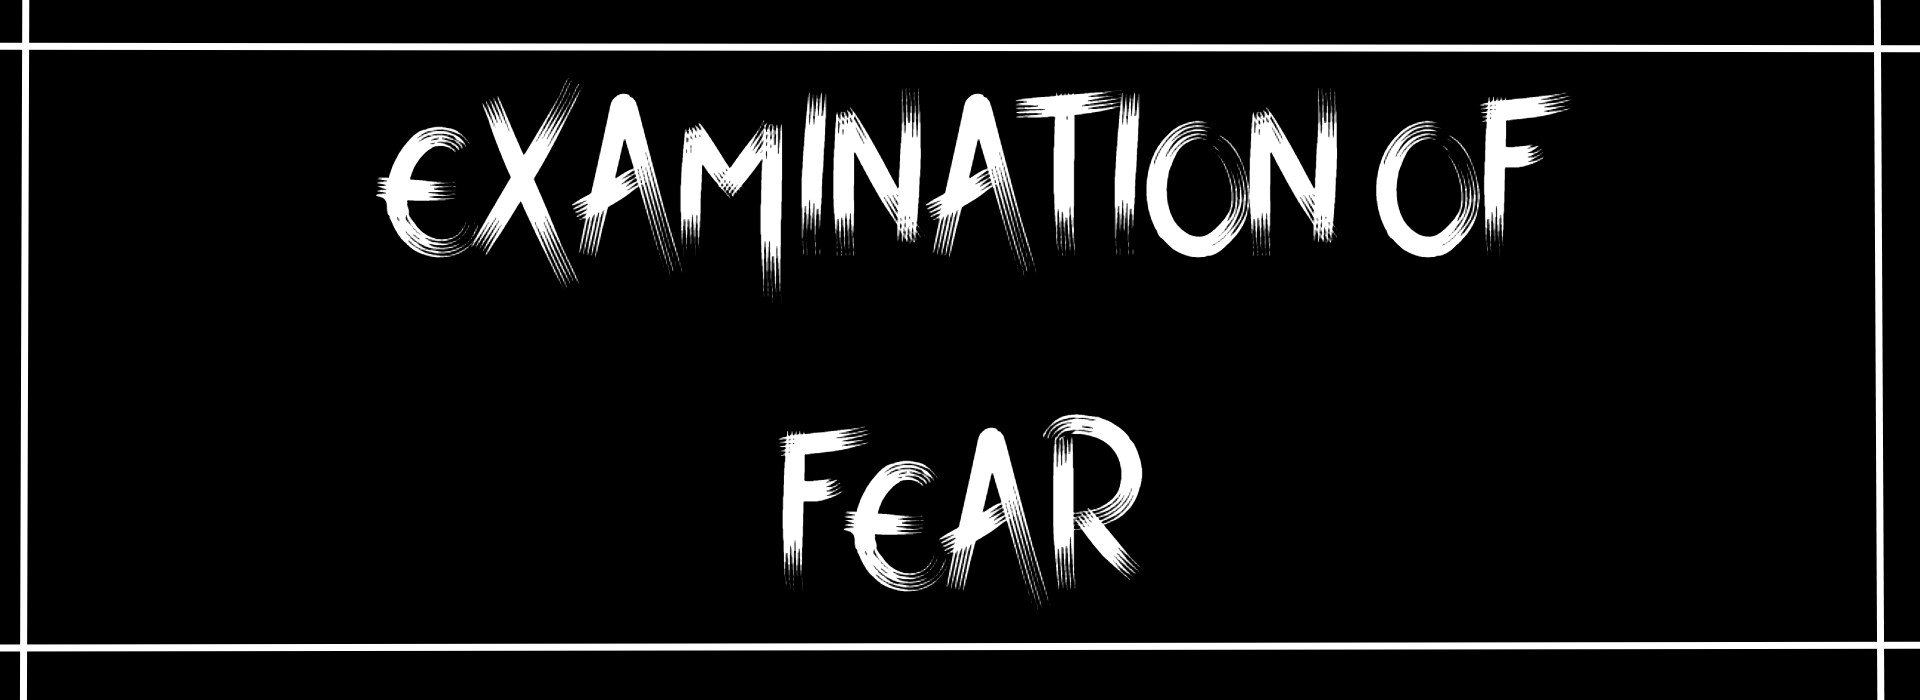 Examination of Fear - Analog Horror Game